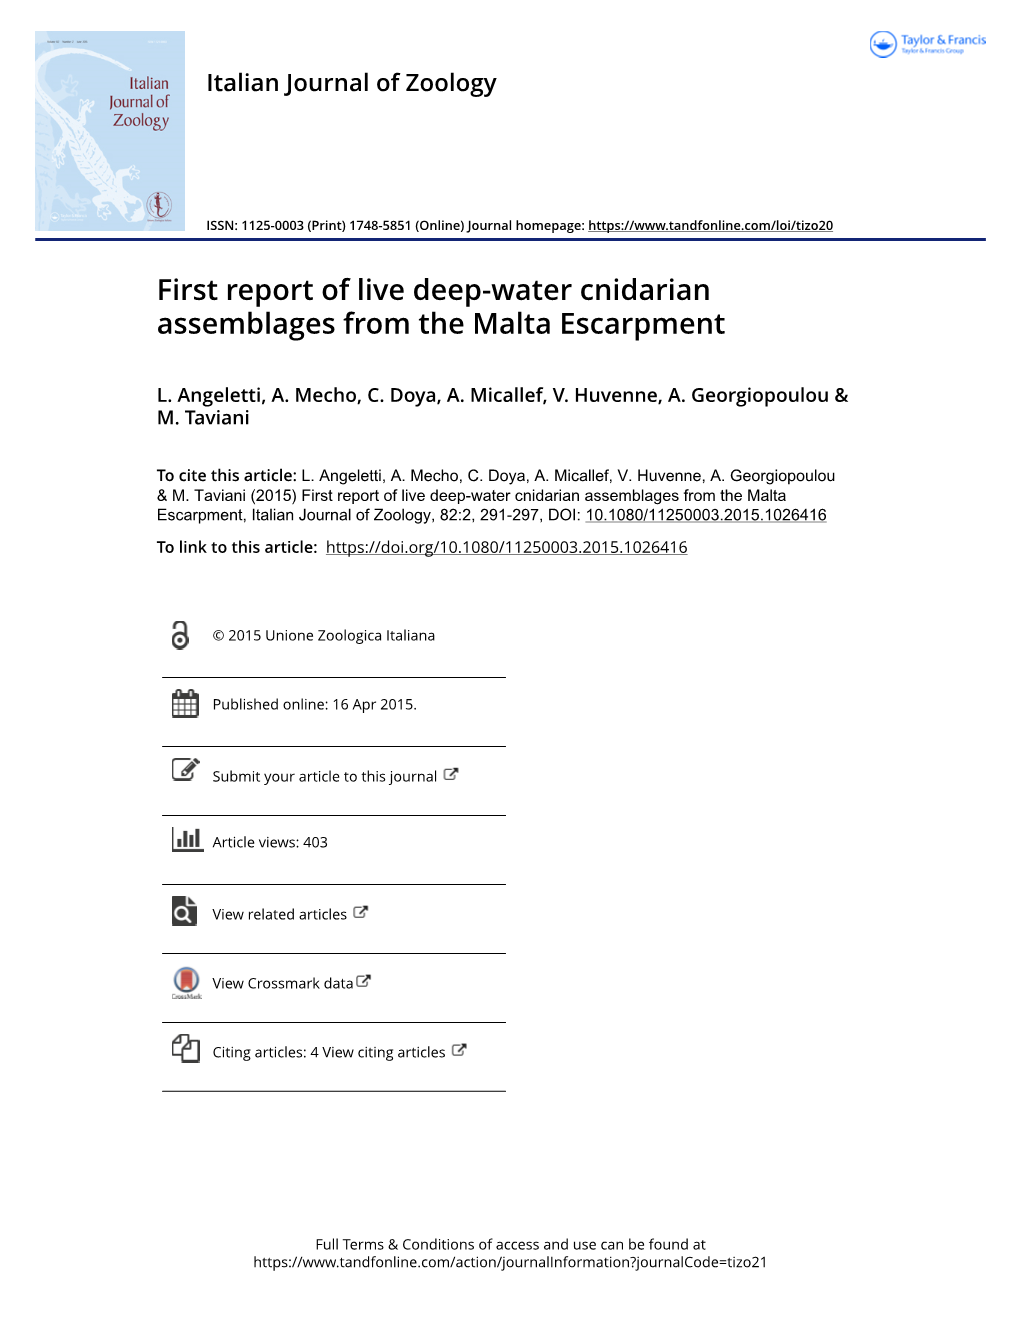 First Report of Live Deep-Water Cnidarian Assemblages from the Malta Escarpment